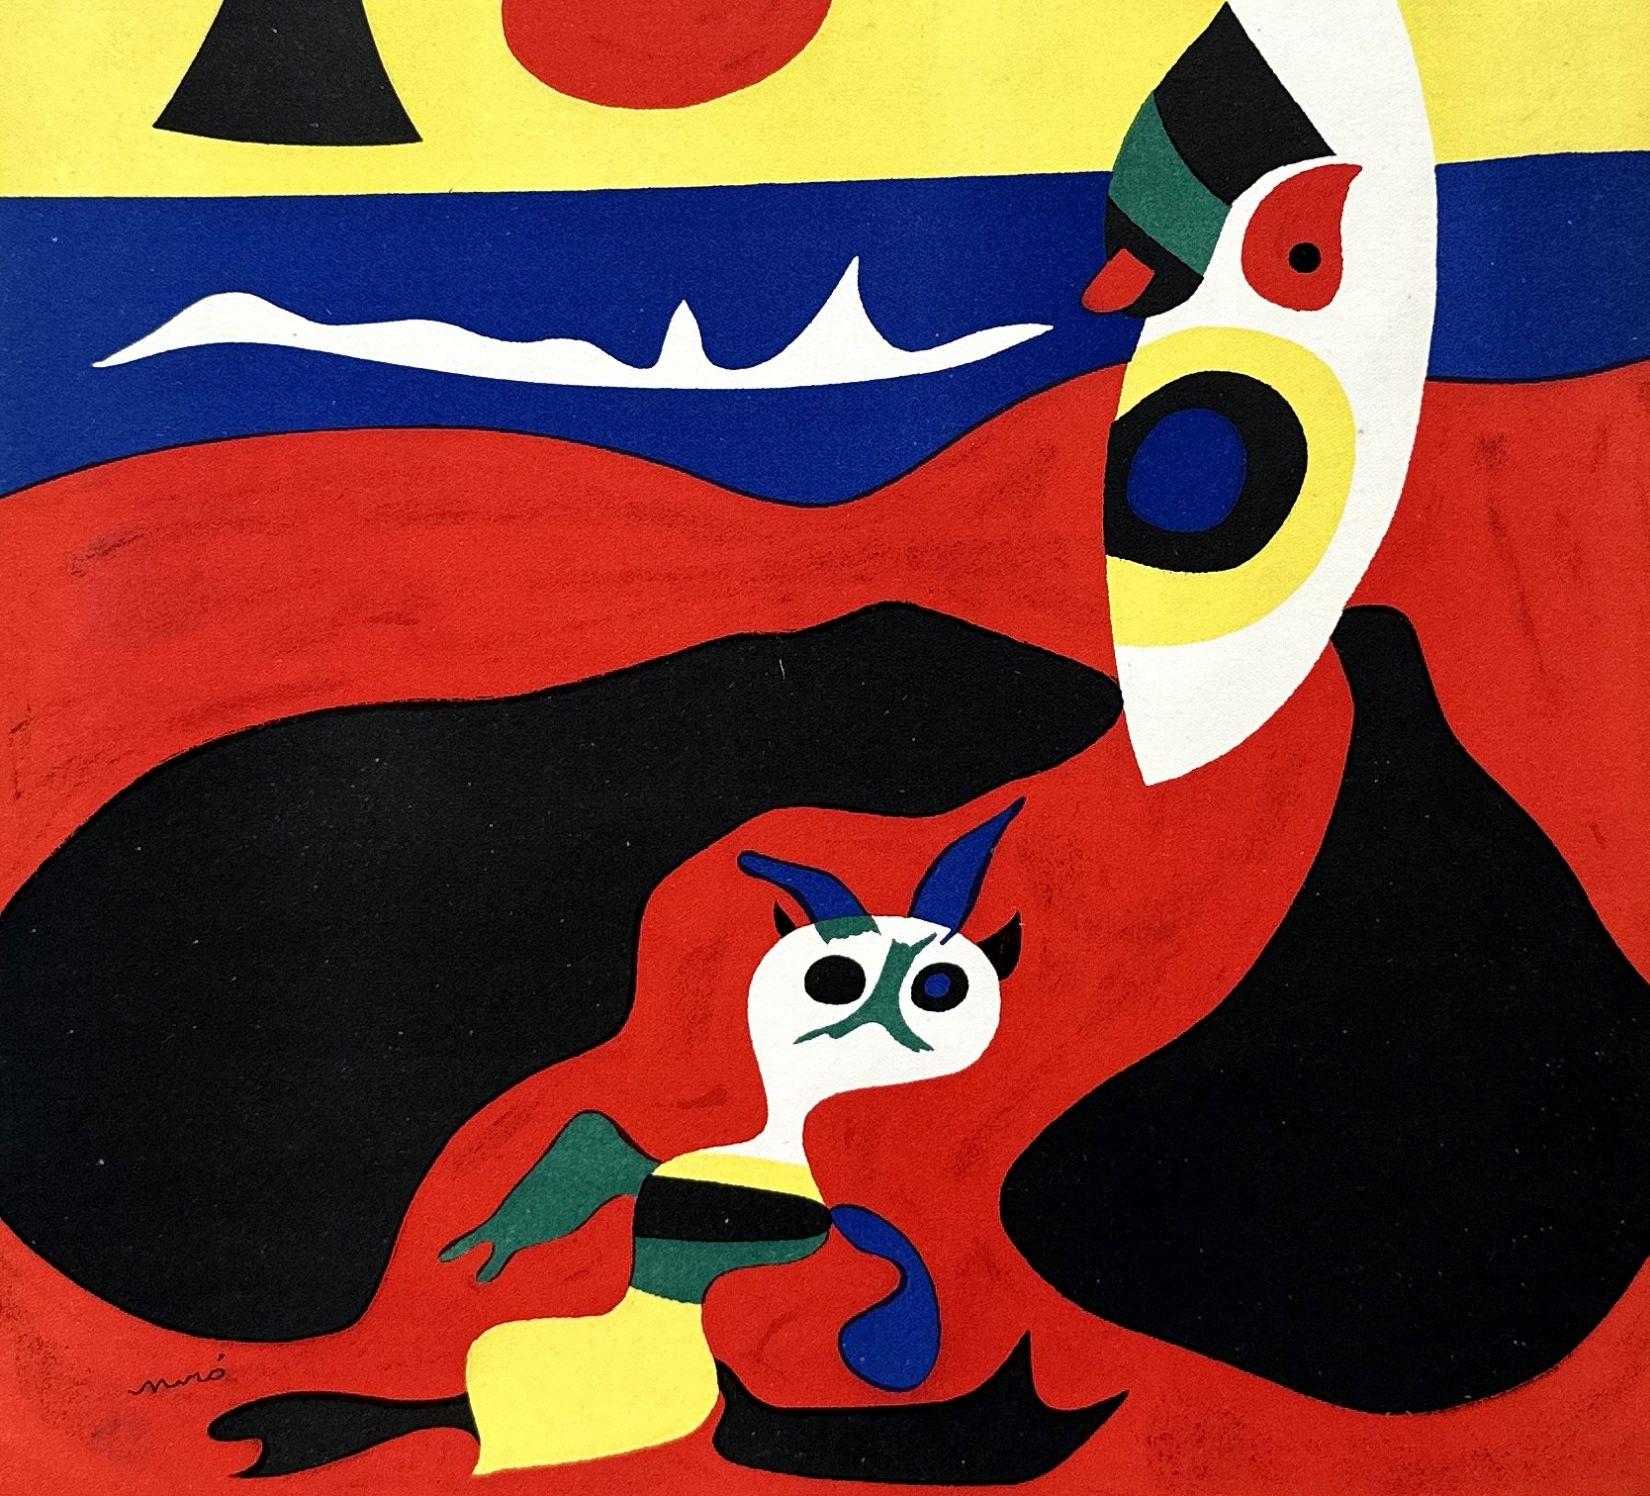 Abstract Figures (Summer) - Lithograph Signed in the Plate - Modern Print by Joan Miró